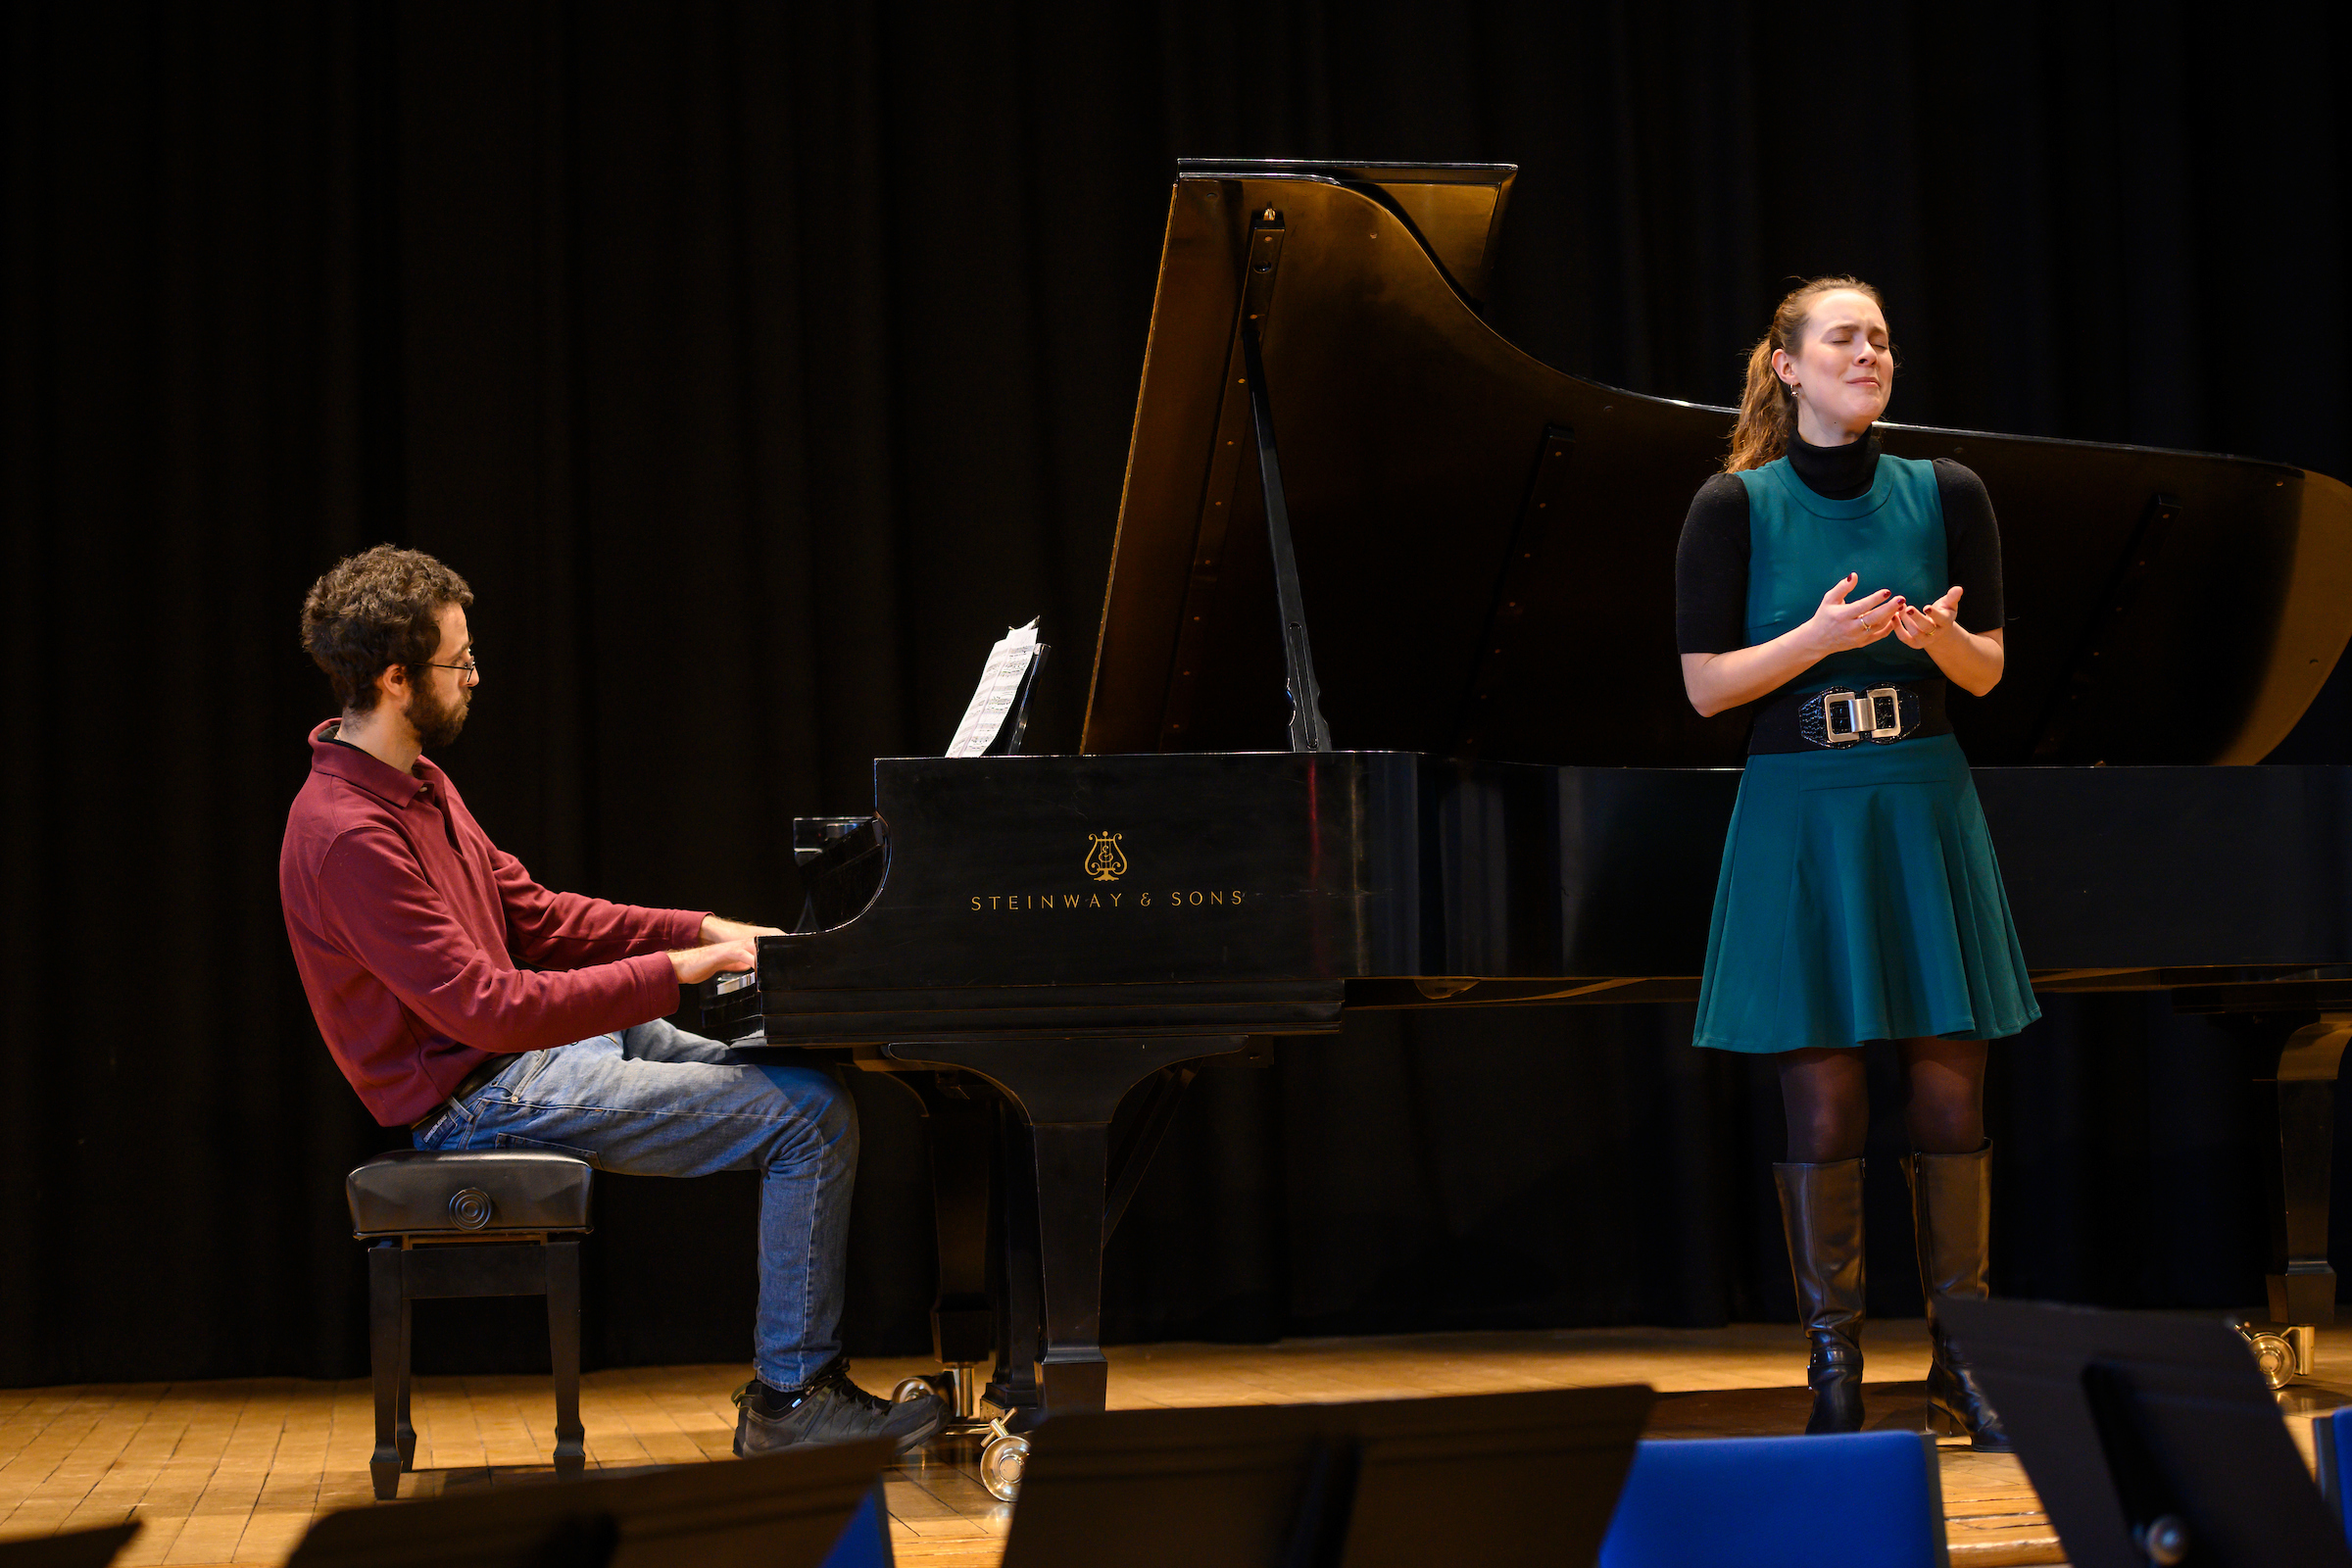 A pianist and singer perform together.